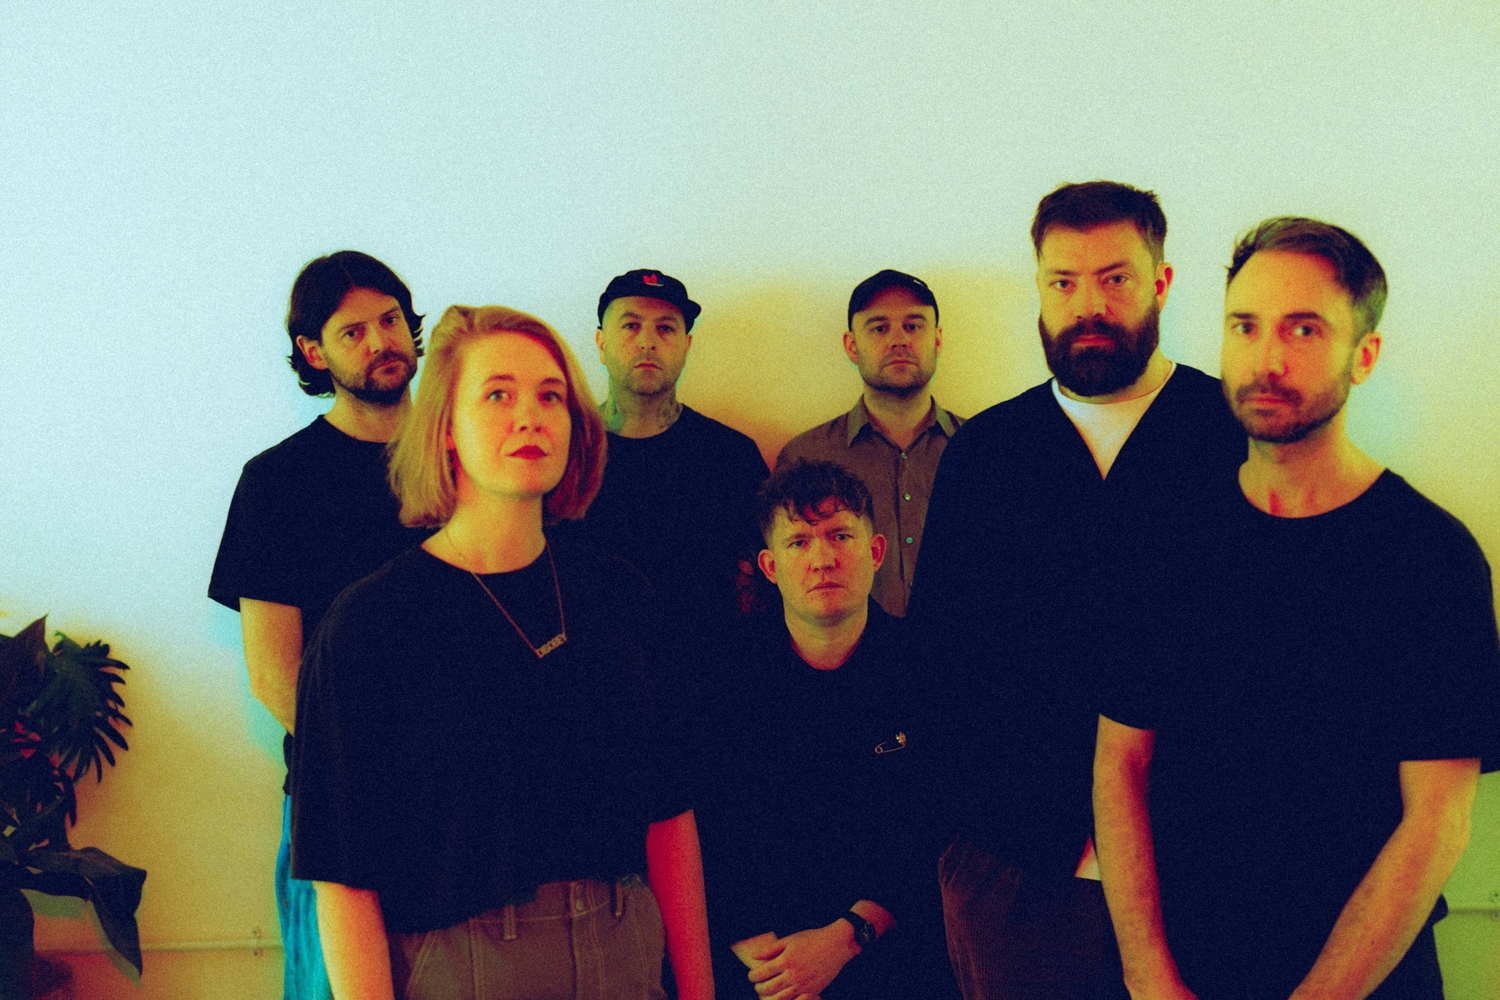 Los Campesinos! to return with seventh album ‘All Hell’ this summer